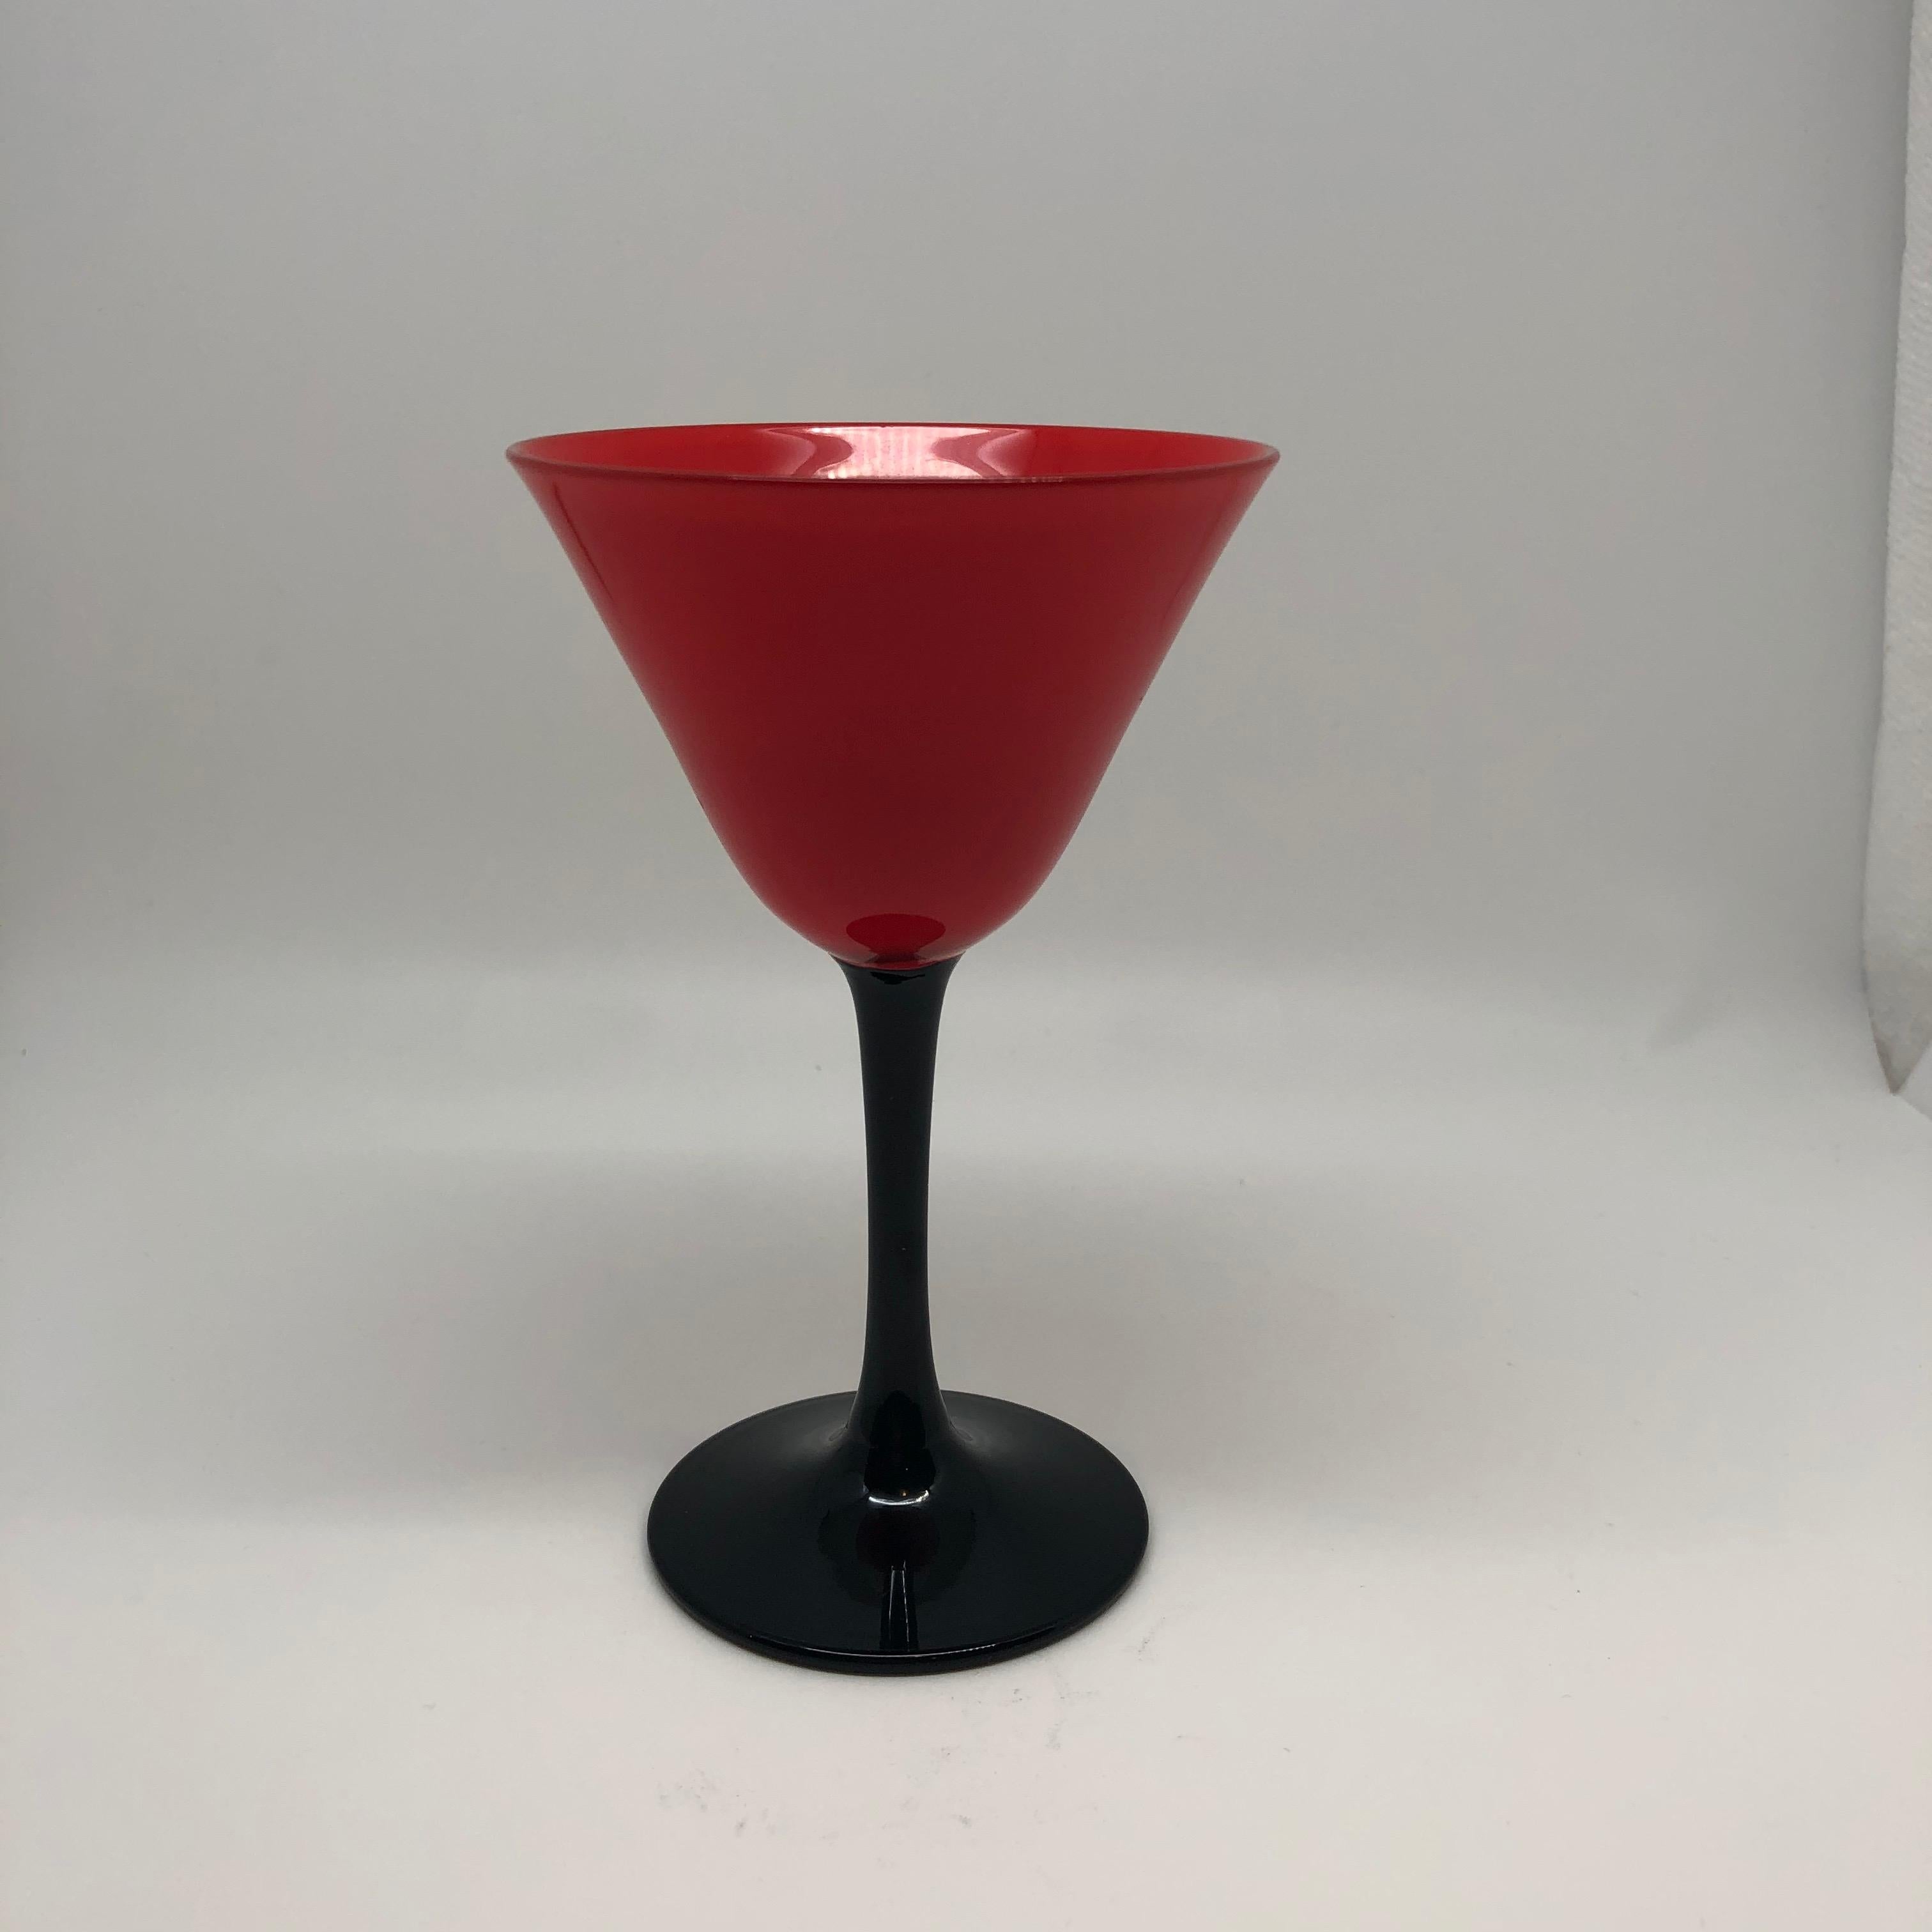 Other Set of 11 Pairpoint Art Deco Stemware Glasses with Red Tops and Black Stems